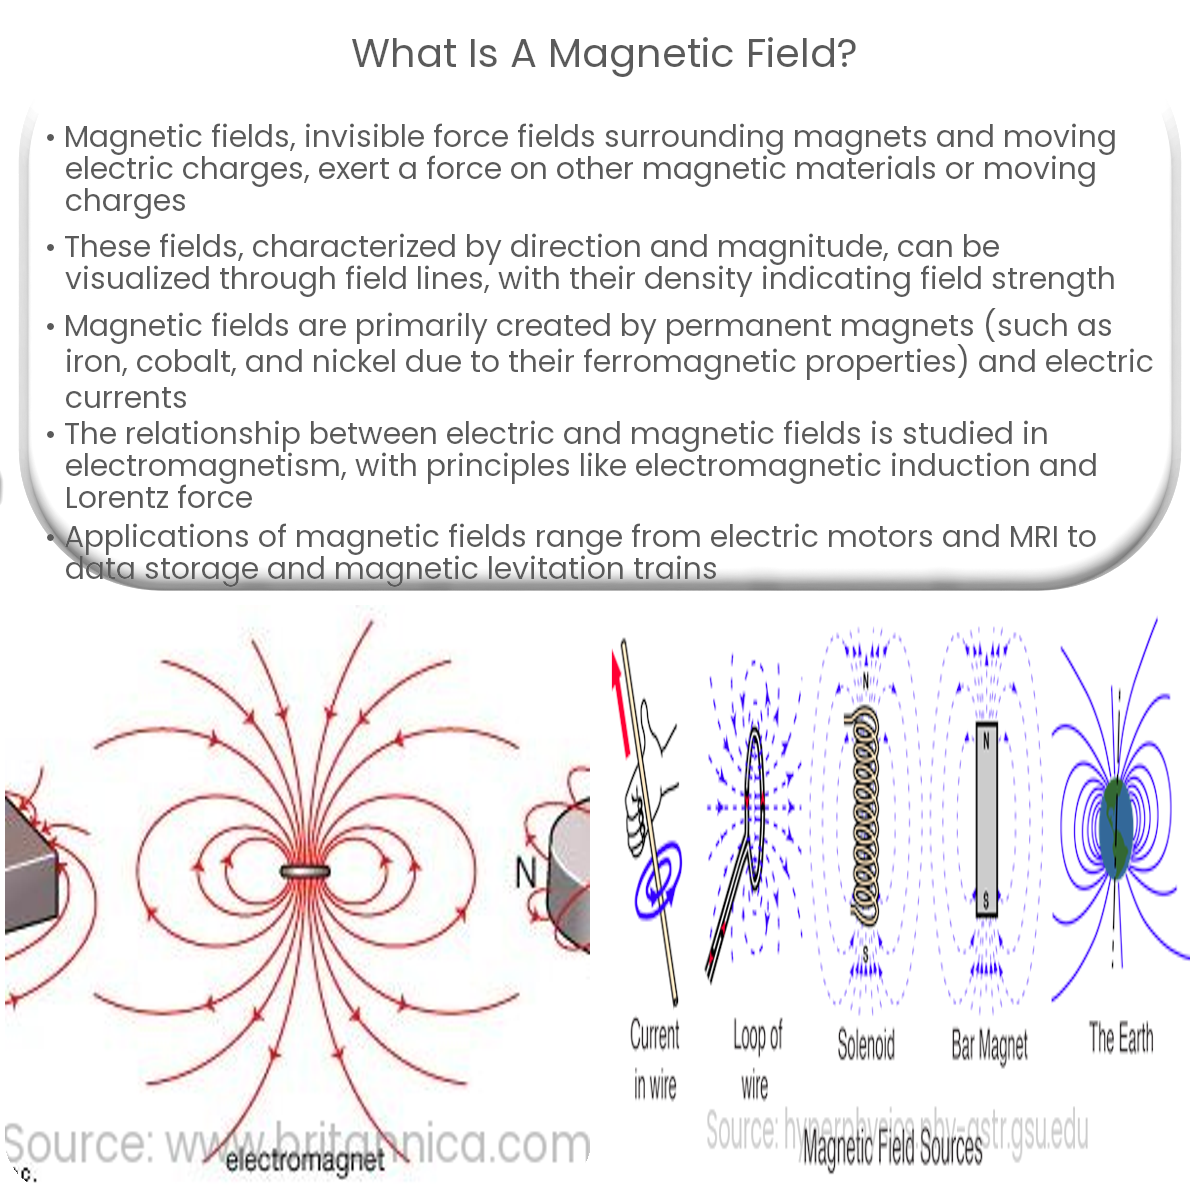 Magnetic field, Definition & Facts